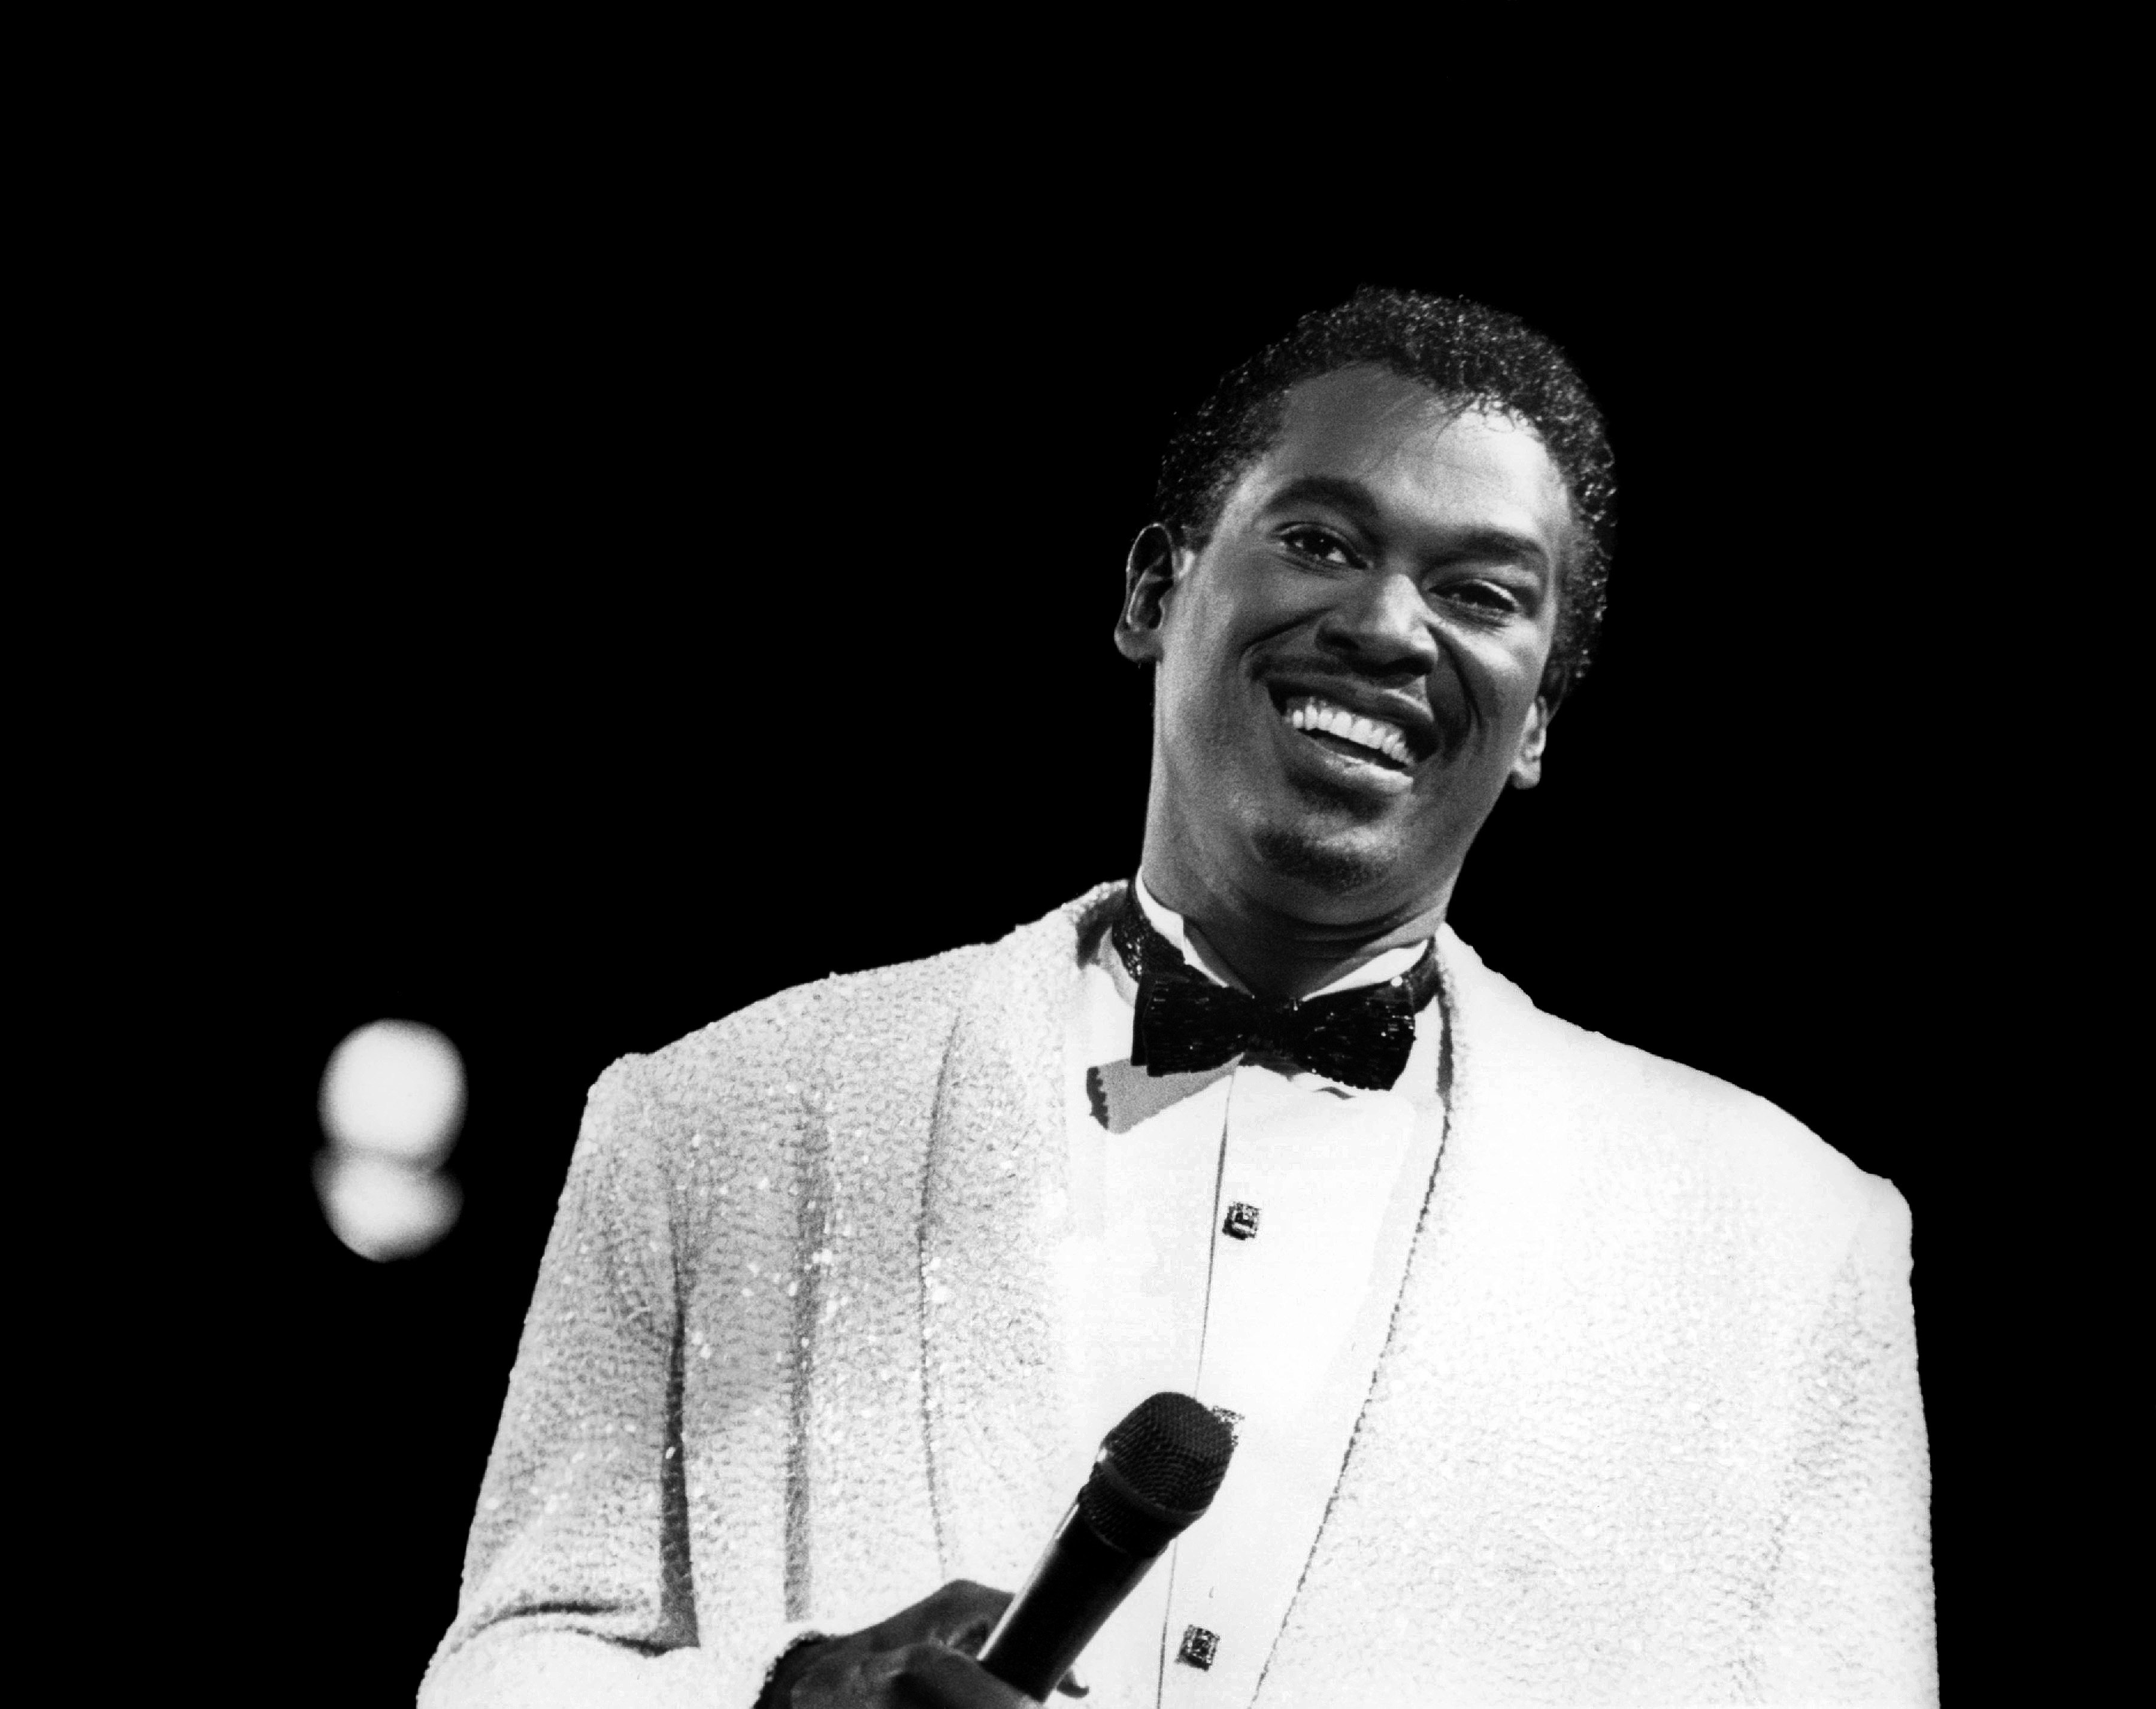 Superb Luther Vandross 10”x8” Black & White Photograph 